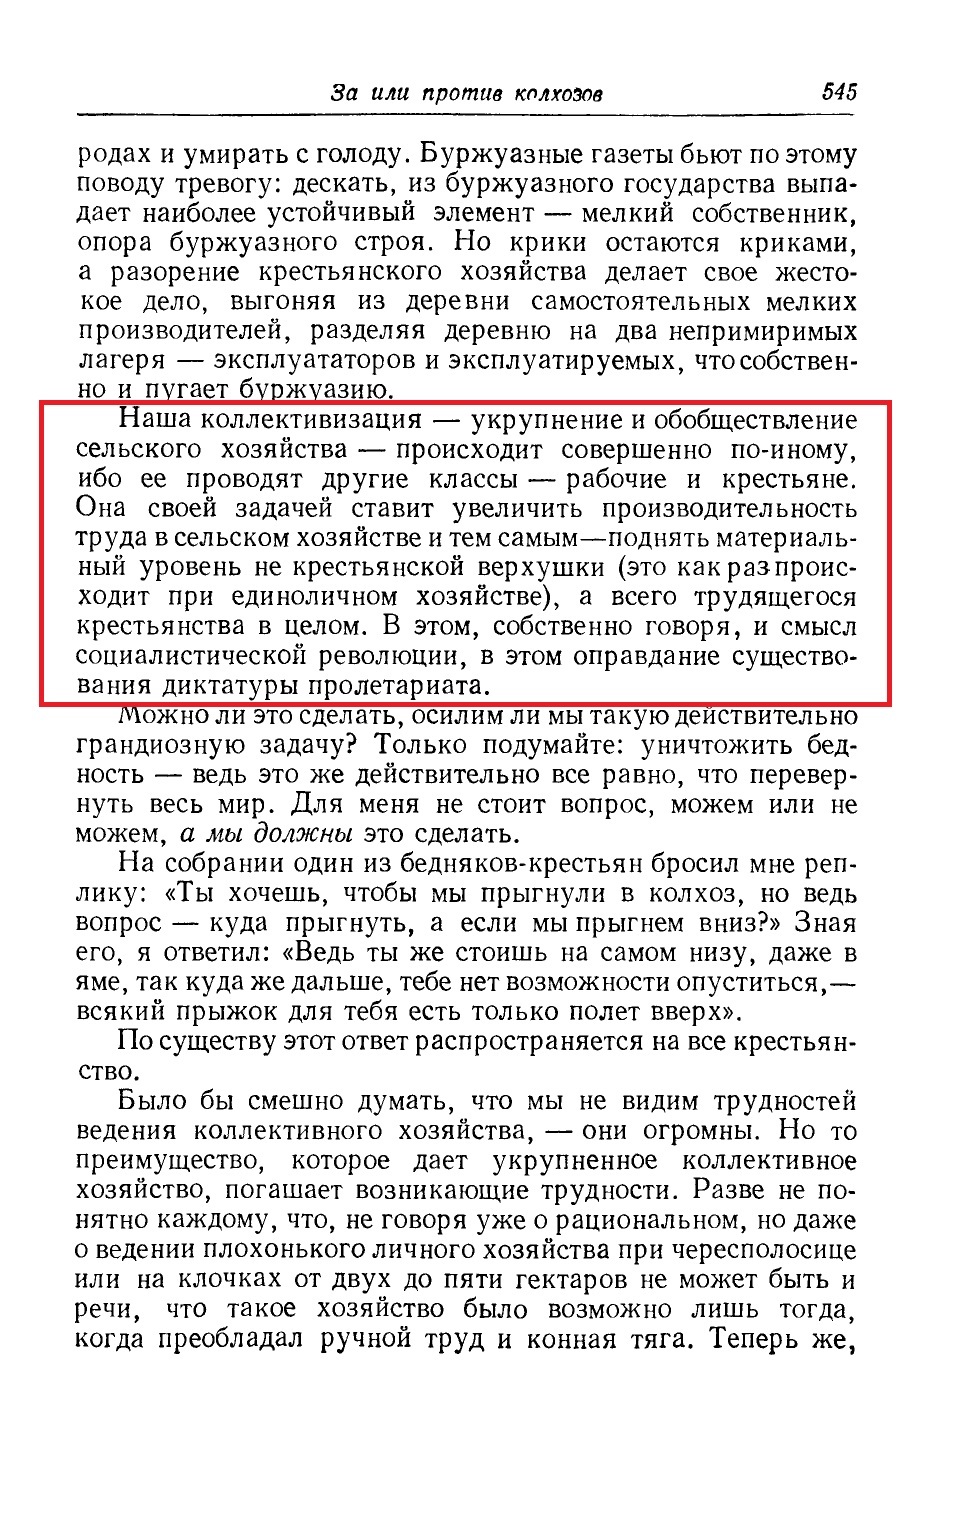 Kalinin on collectivization under the dictatorship of the proletariat - Quotes, Kalinin, Collectivization, Dictatorship, the USSR, Longpost